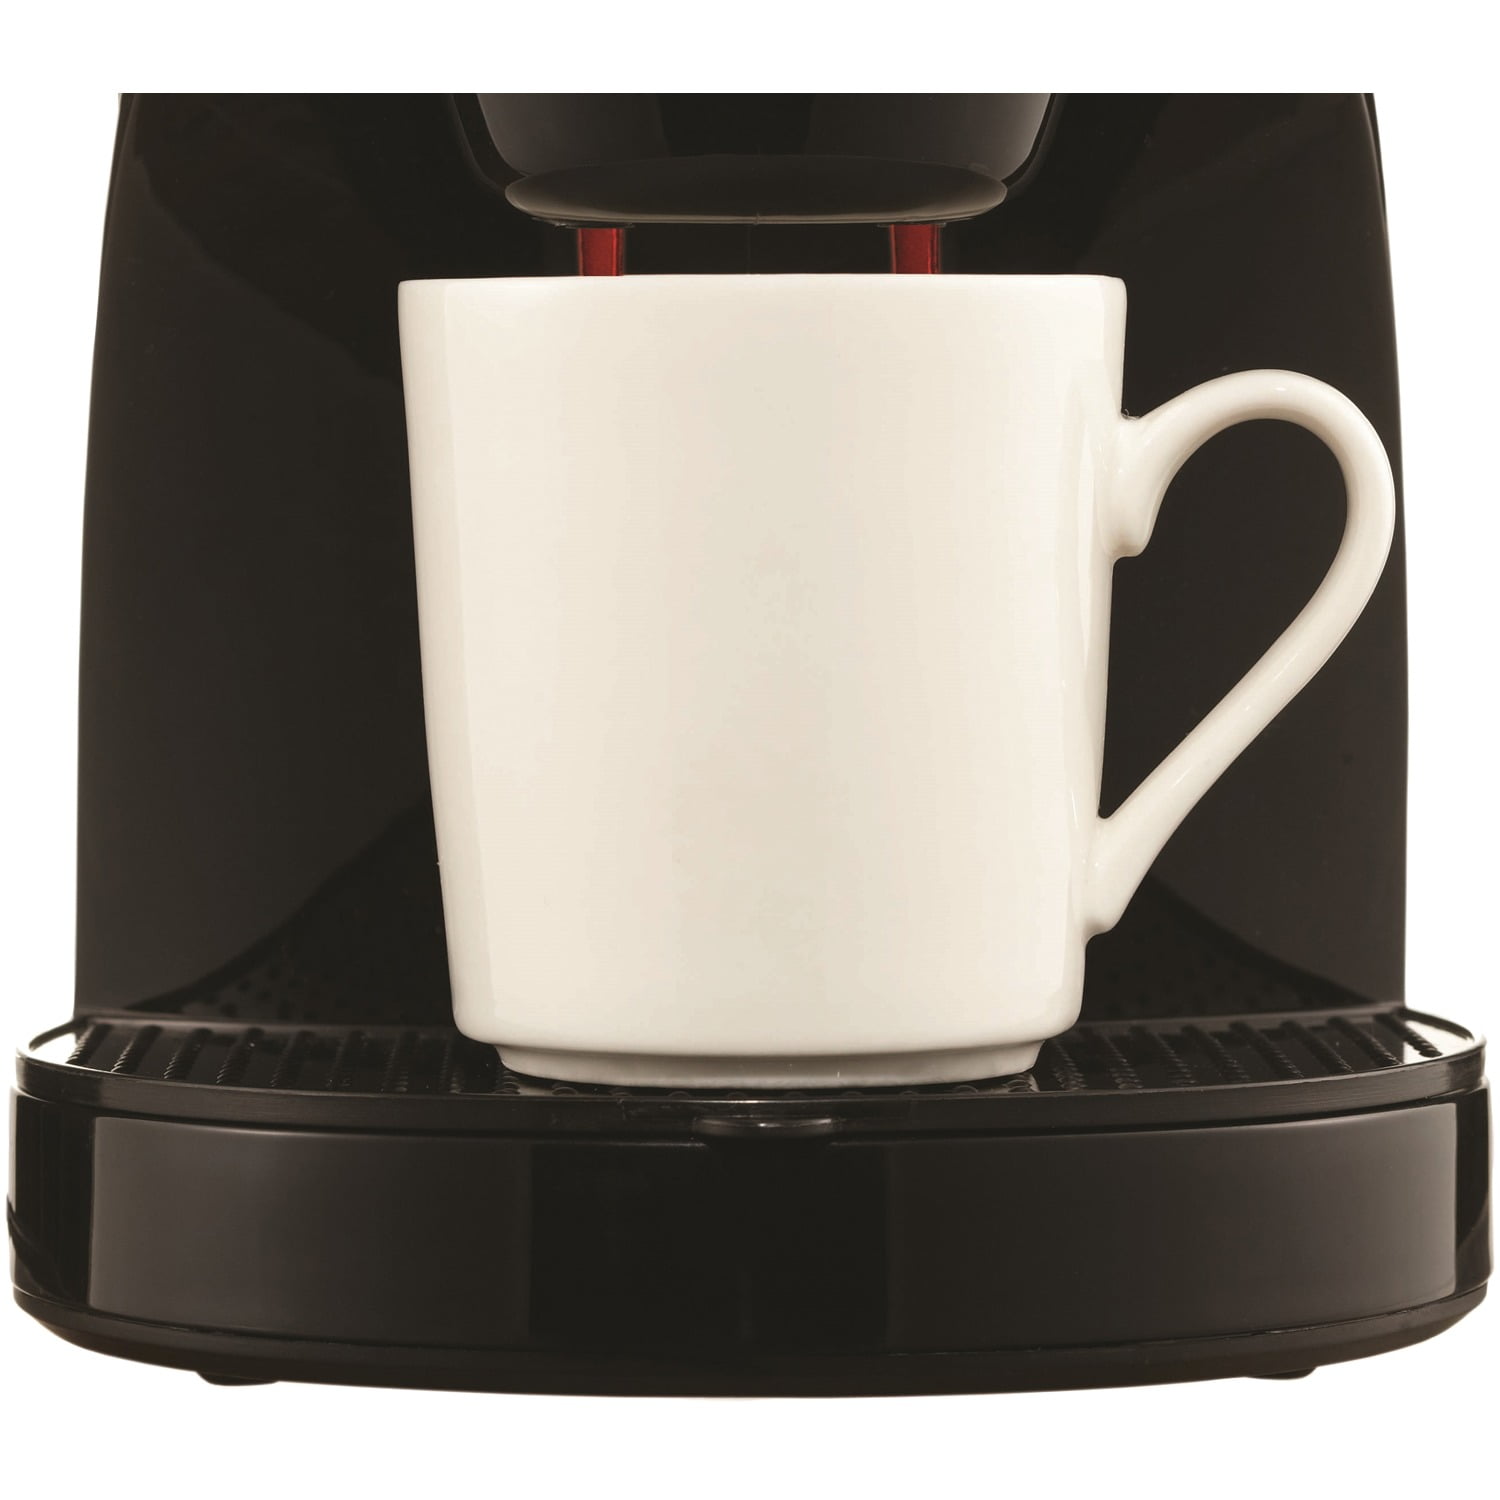 Brentwood TS-112R Single Serve Coffee Maker with Ceramic Mug, Red -  Brentwood Appliances